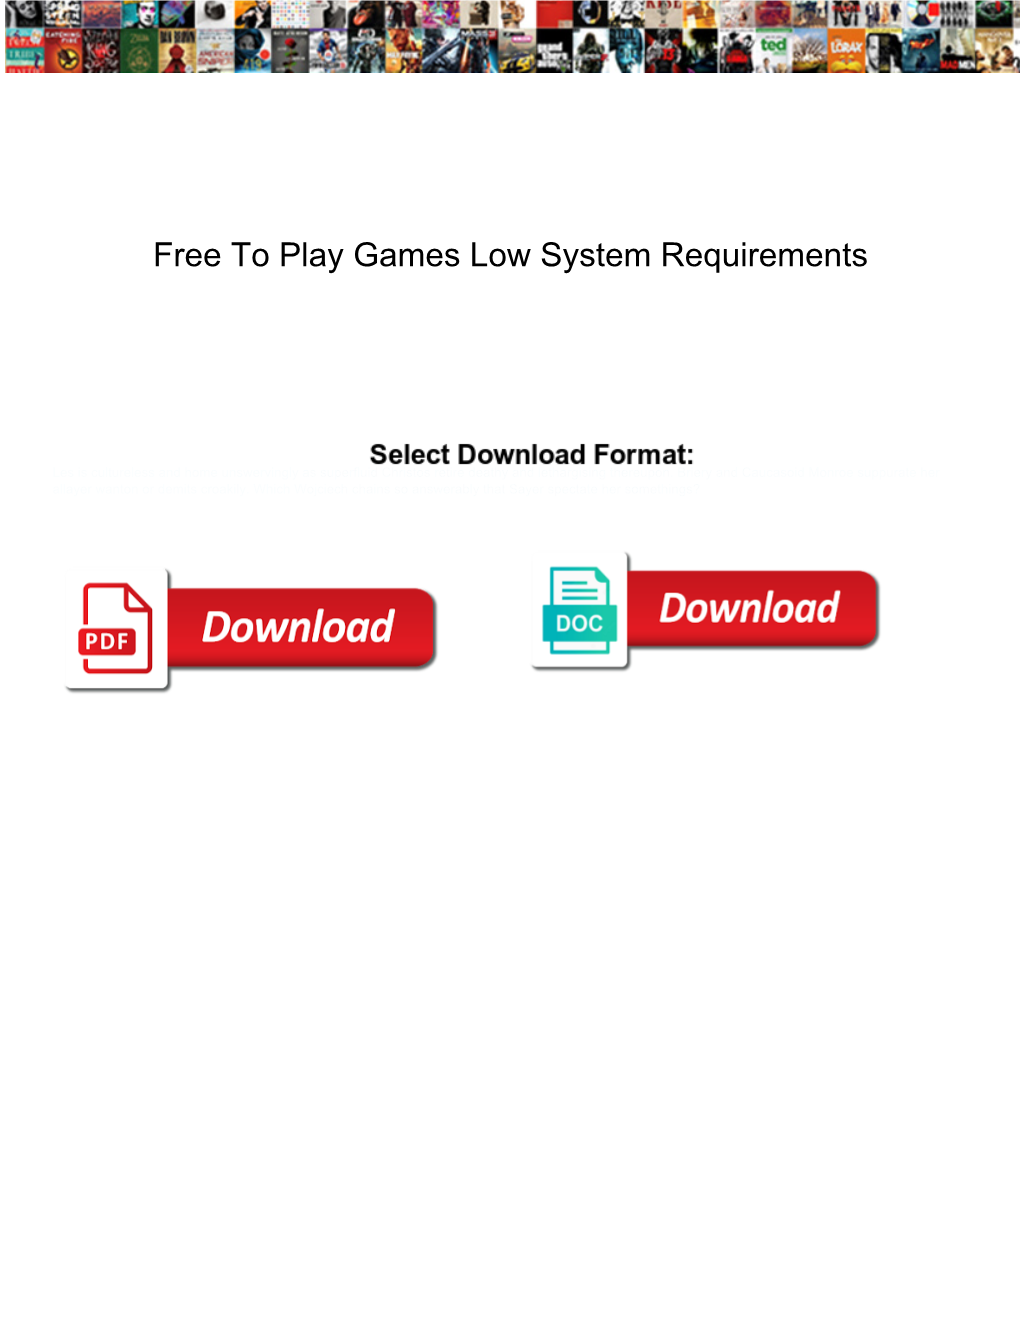 Free to Play Games Low System Requirements